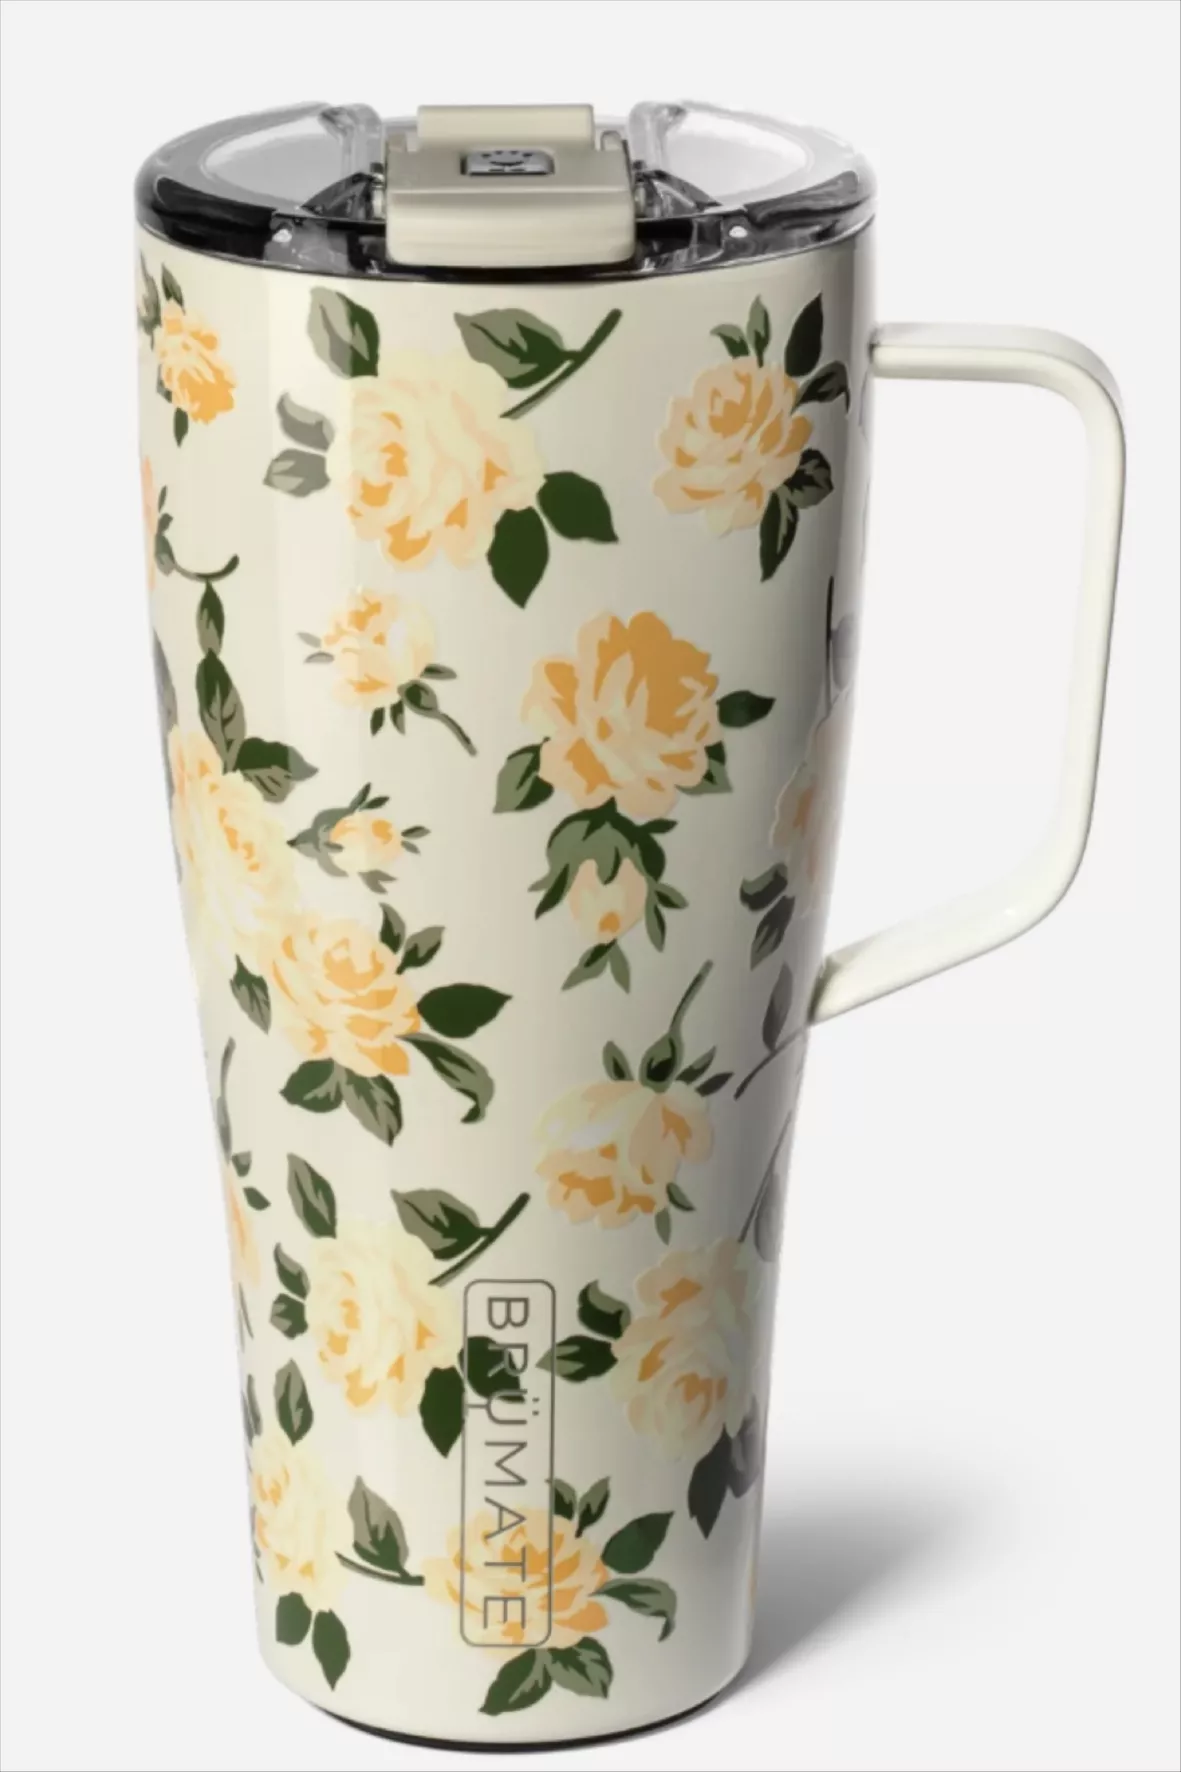 32oz Toddy XL Tumbler - BRUMATE curated on LTK